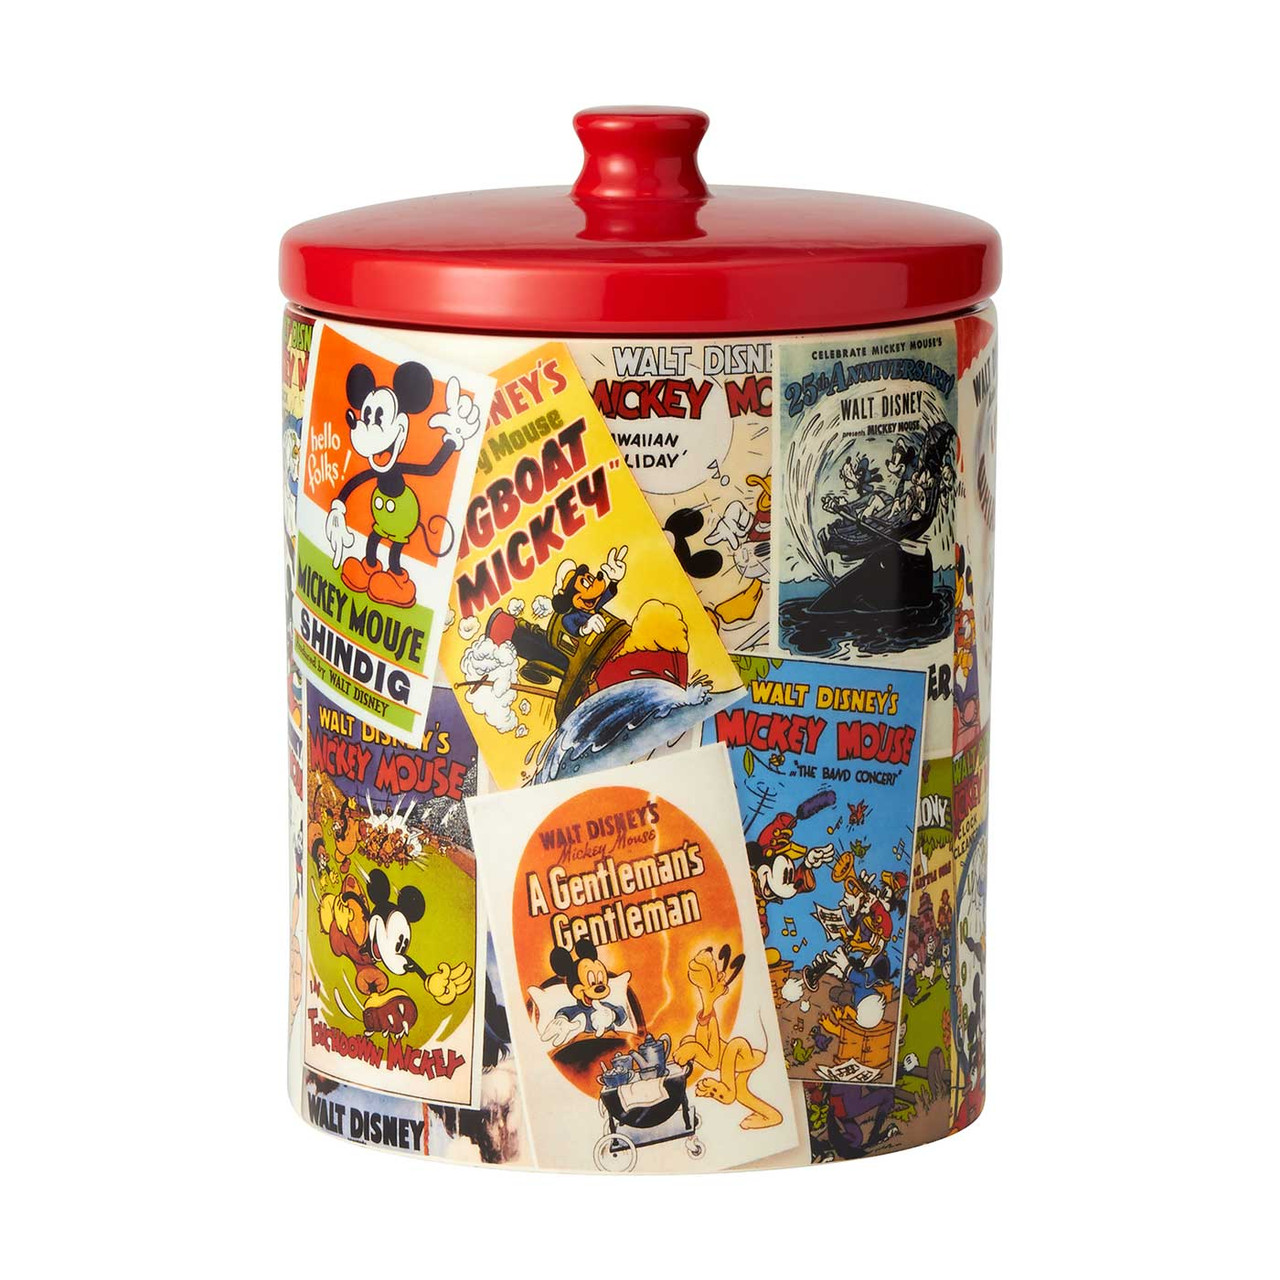 https://cdn11.bigcommerce.com/s-vmynke4q1q/images/stencil/1280x1280/products/4115/8699/6001022-Disney-Ceramics-Mickey-Poster-Collage-Cookie-Jar-Canister-Angle-4__66887.1645764814.jpg?c=1